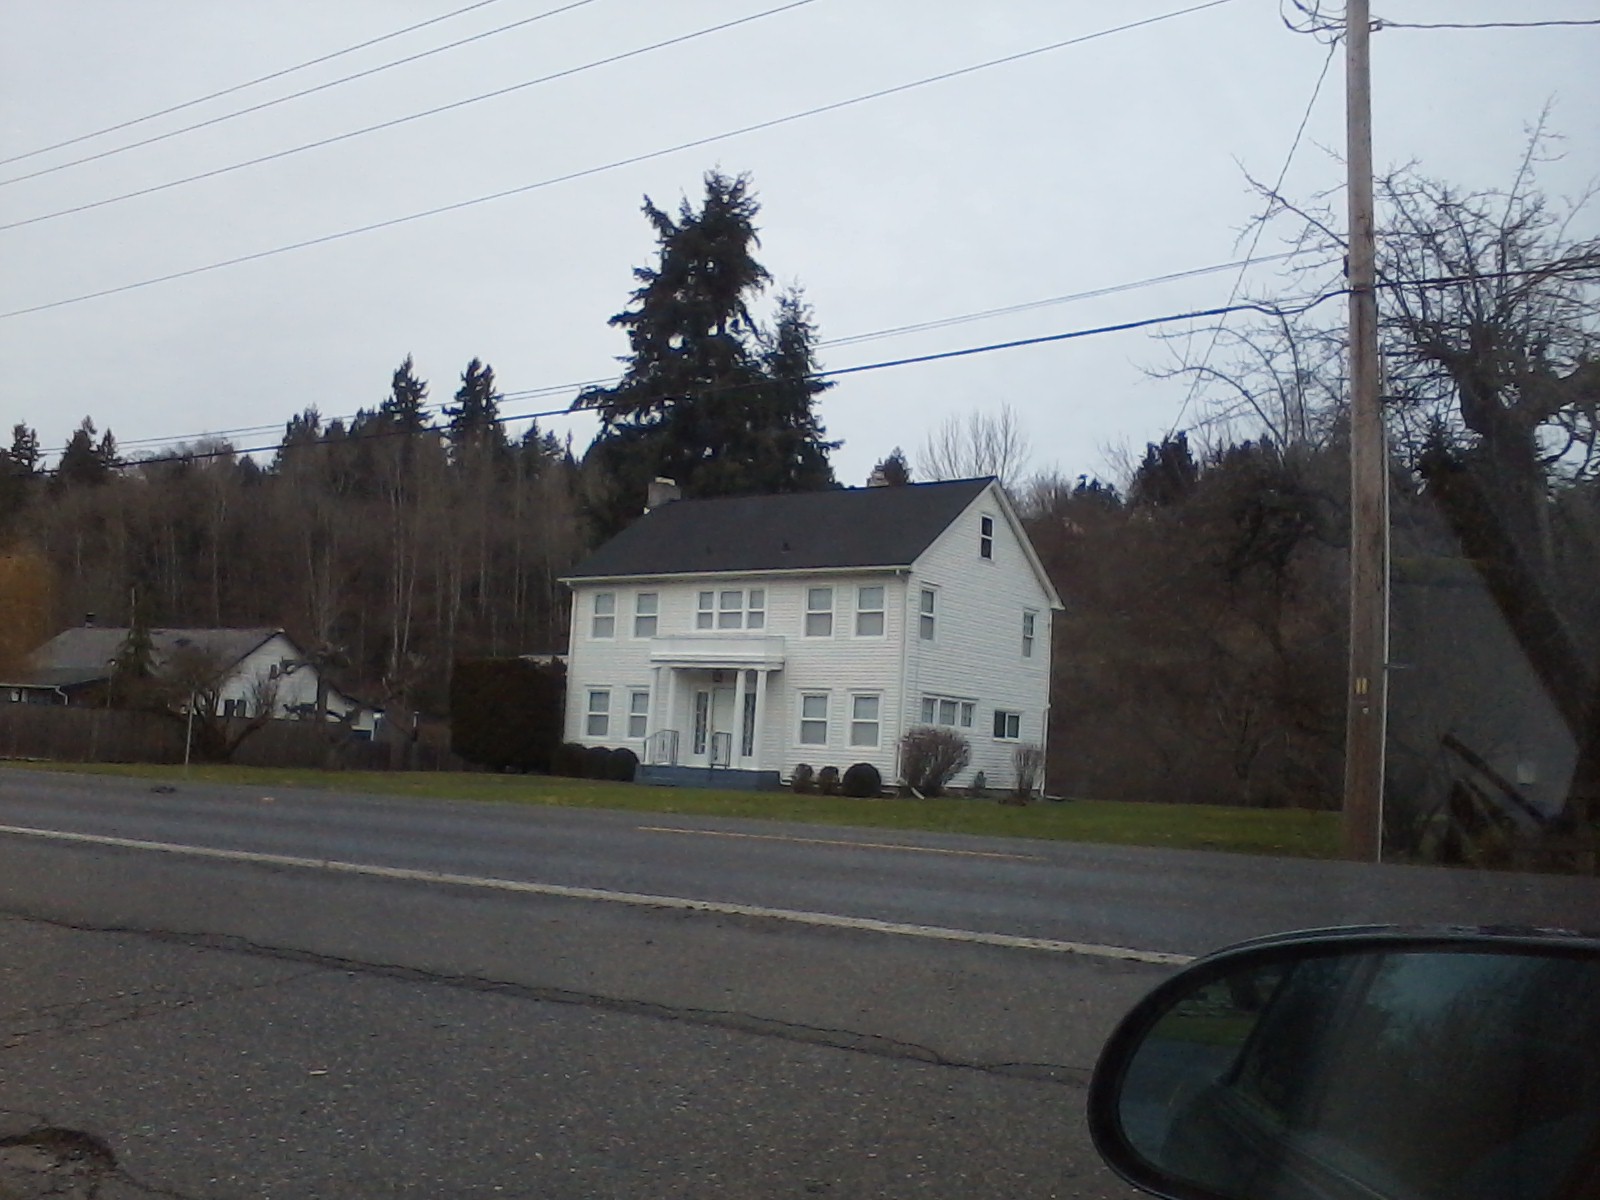 cool old house in sumner wa